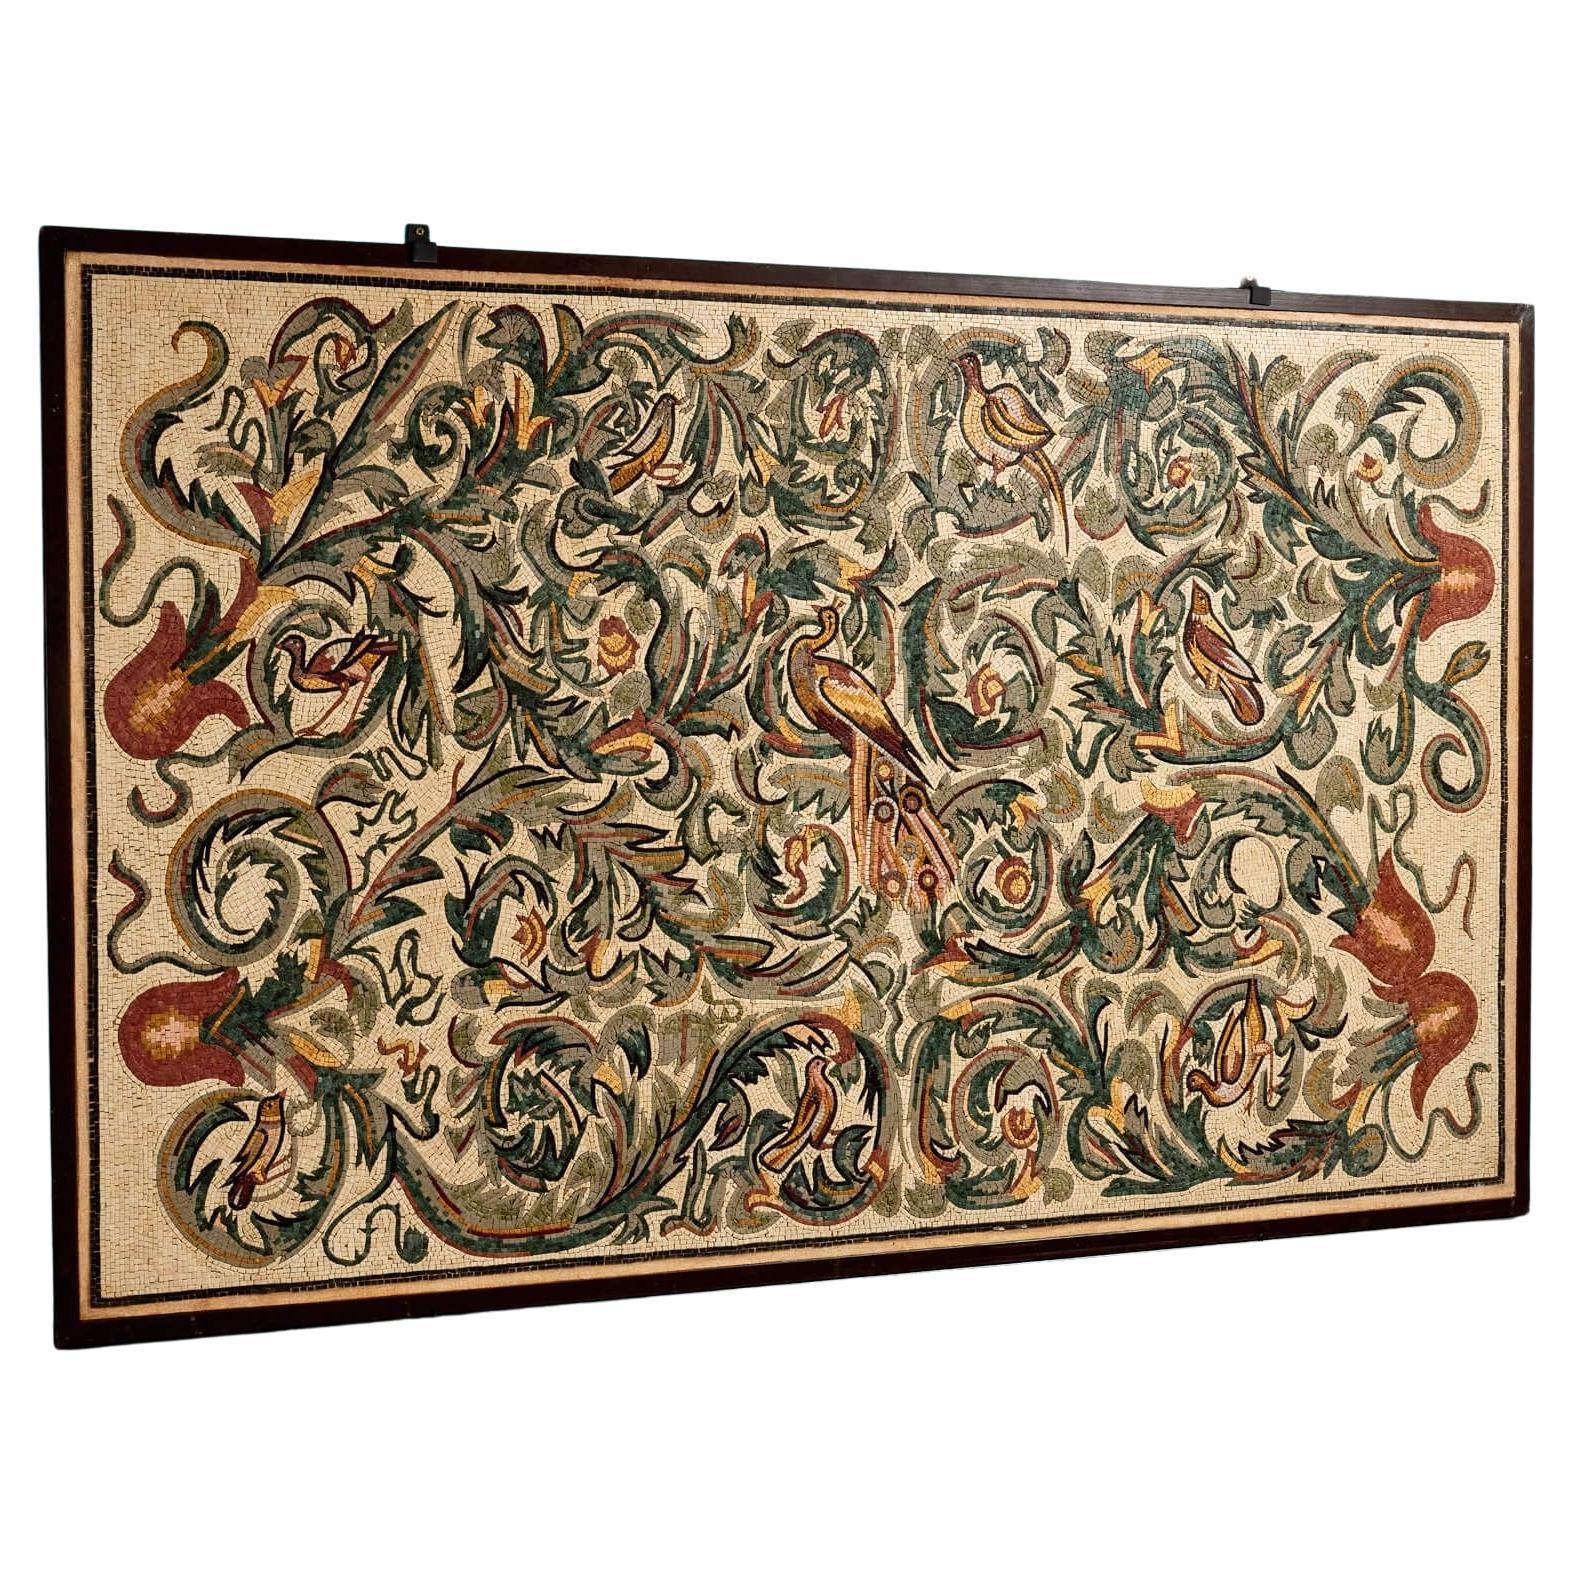 Large Roman Style Mosaic Wall Panel For Sale